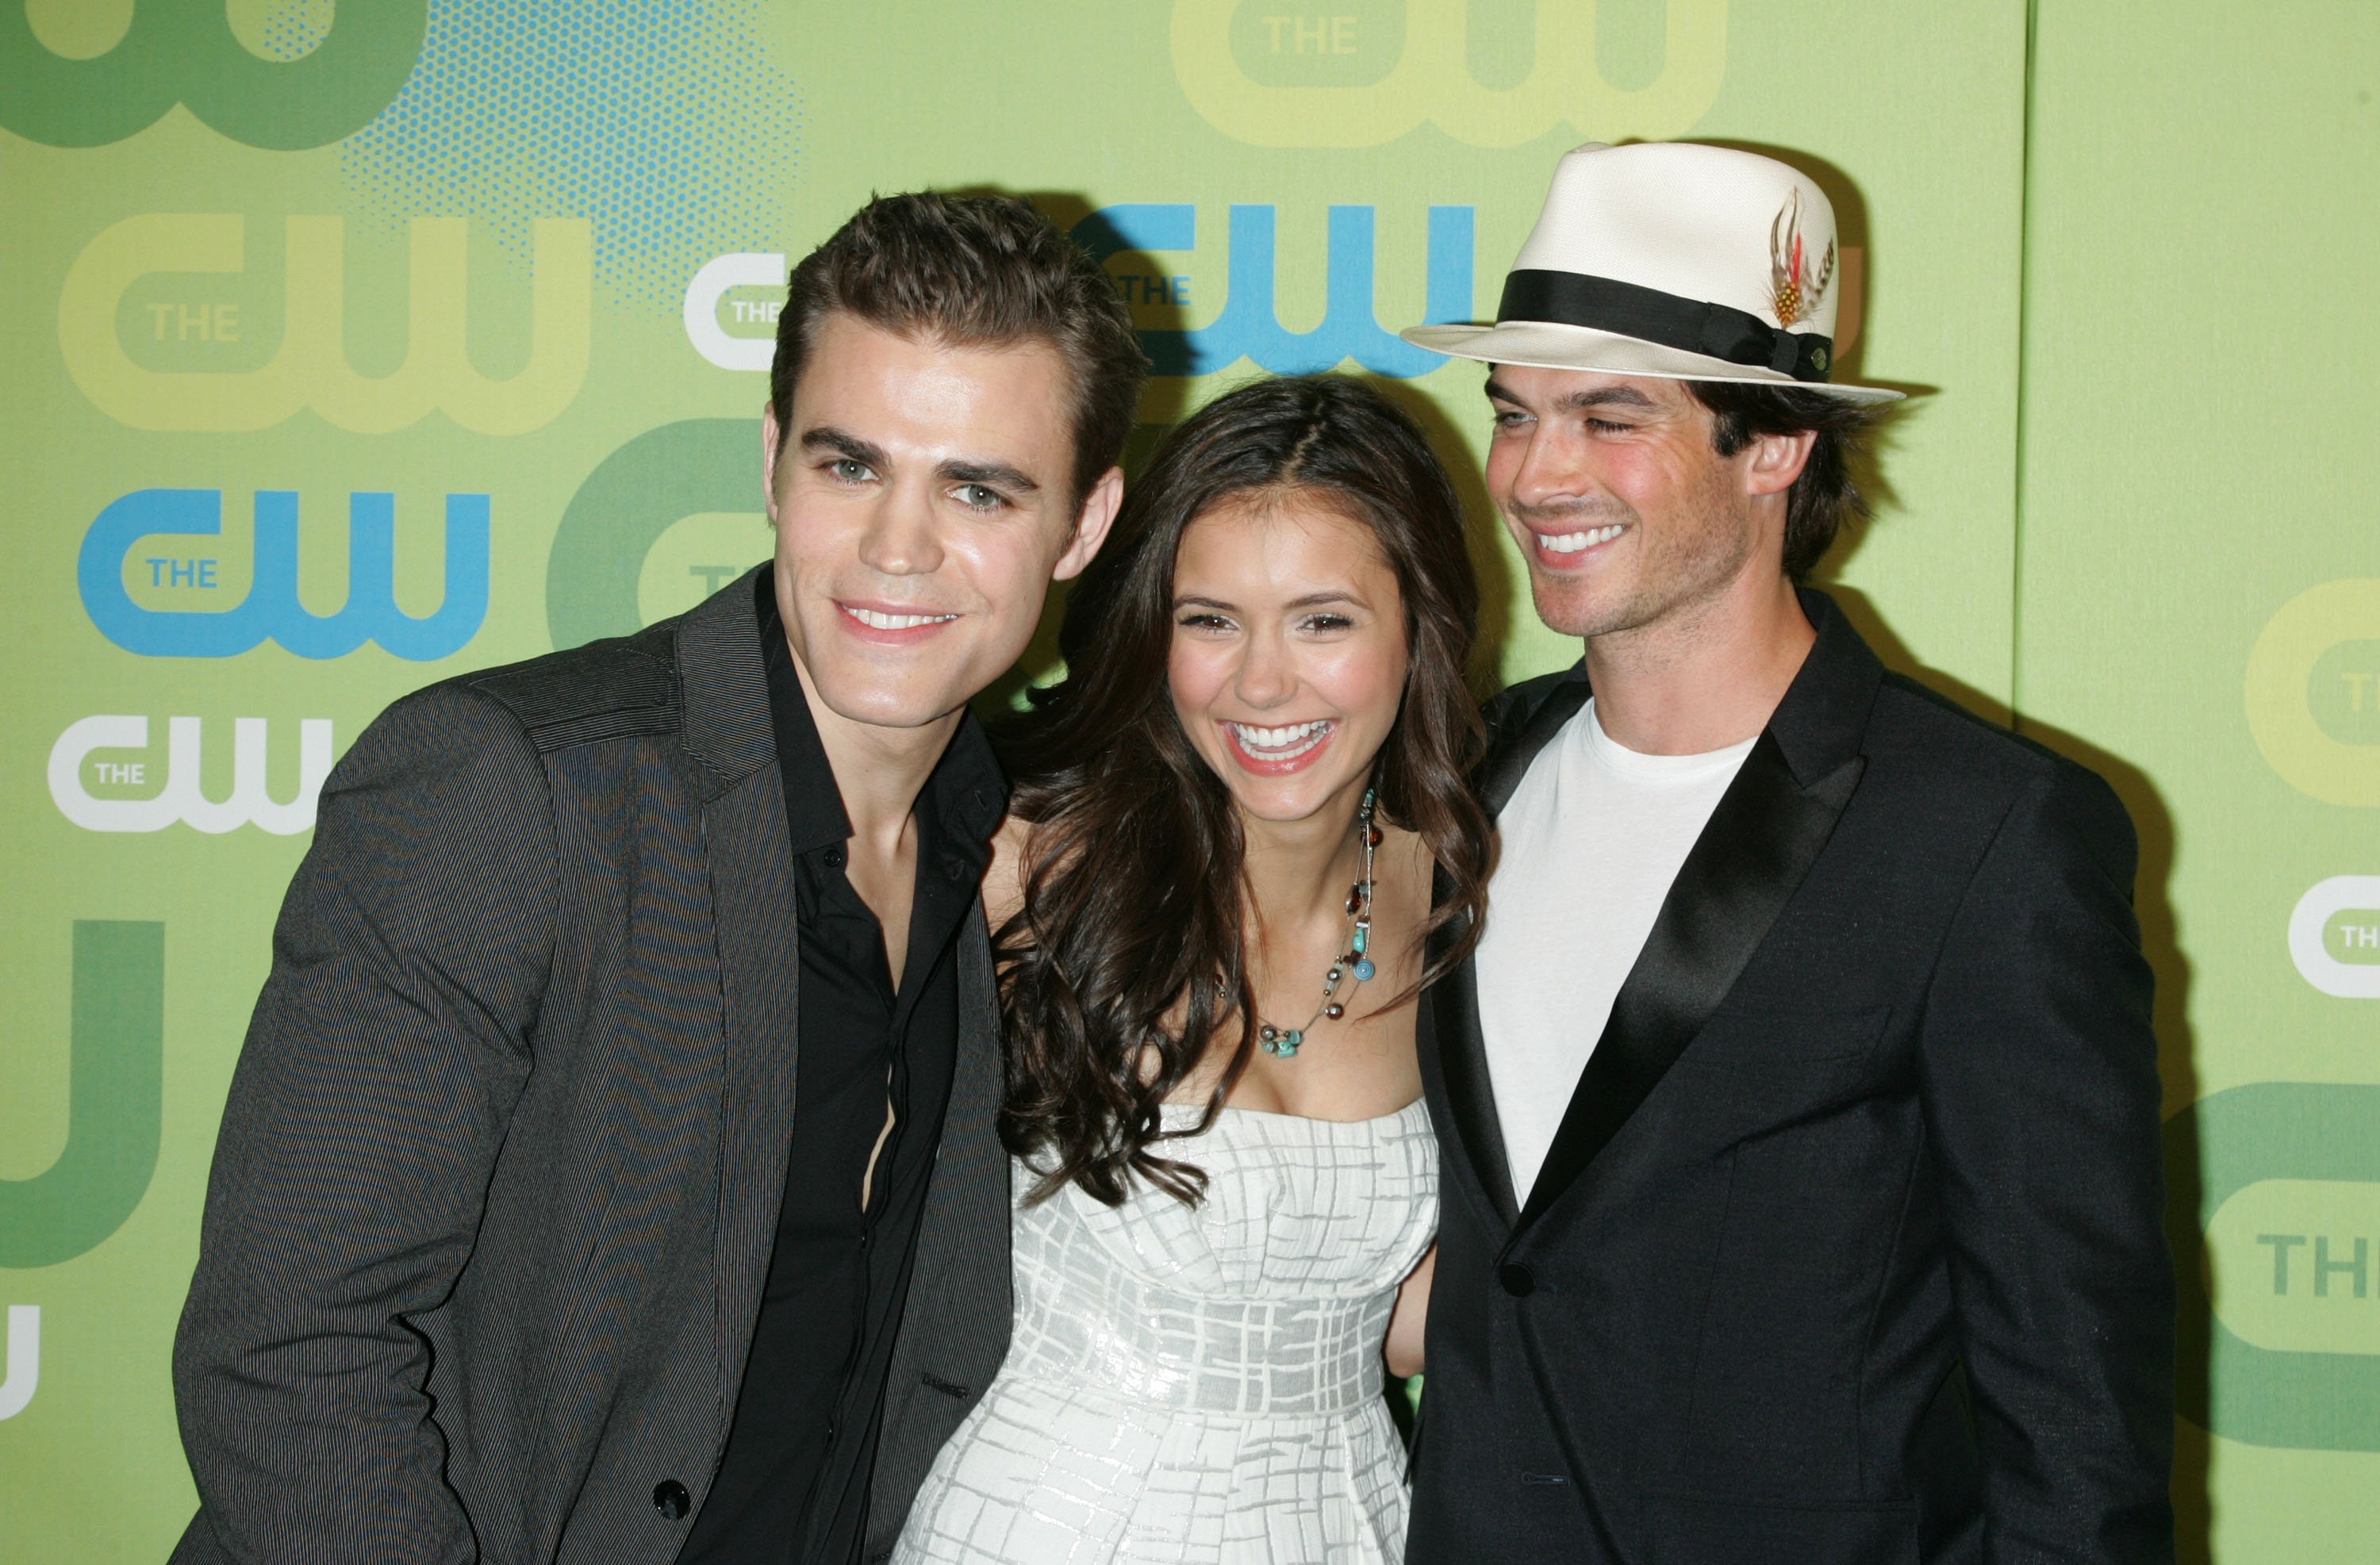 Paul Wesley, Nina Dobrev, and Ian Somerhalder, who starred on 'The Vampire Diaries,' which is leaving Netflix in September 2022, pose for pictures together on the red carpet. Wesley wears a gray suit over a black button-up shirt. Dobrev wears a white strapless dress. Somerhalder wears a black suit over a white shirt and a white fedora.